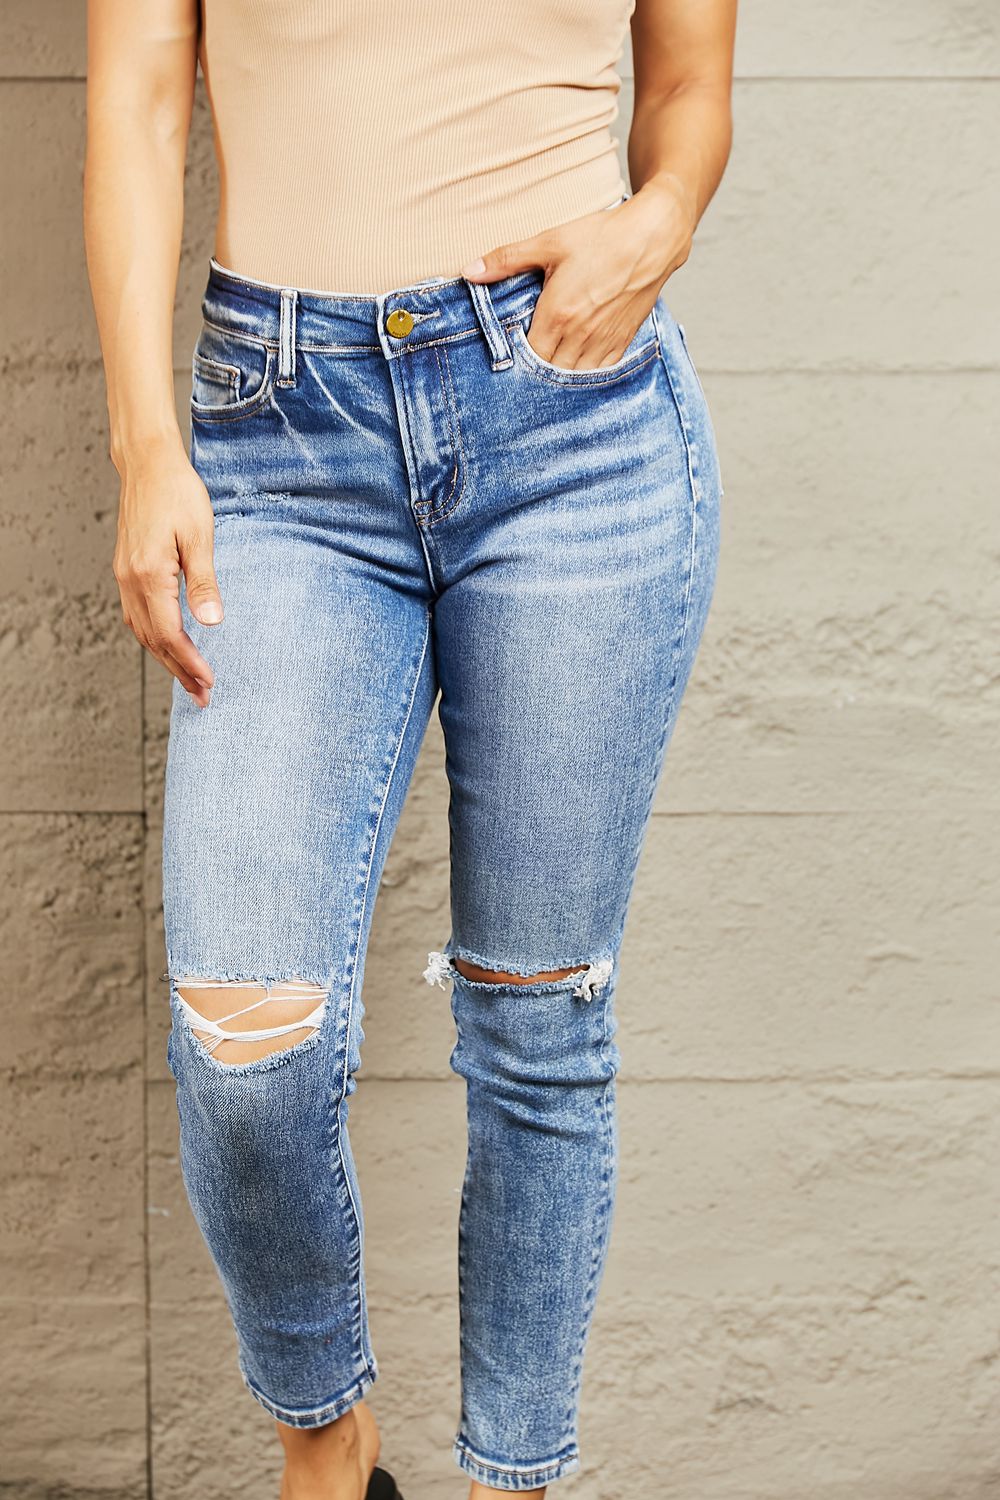 BAYEAS Mid Rise Distressed Skinny Jeans - nailedmoms